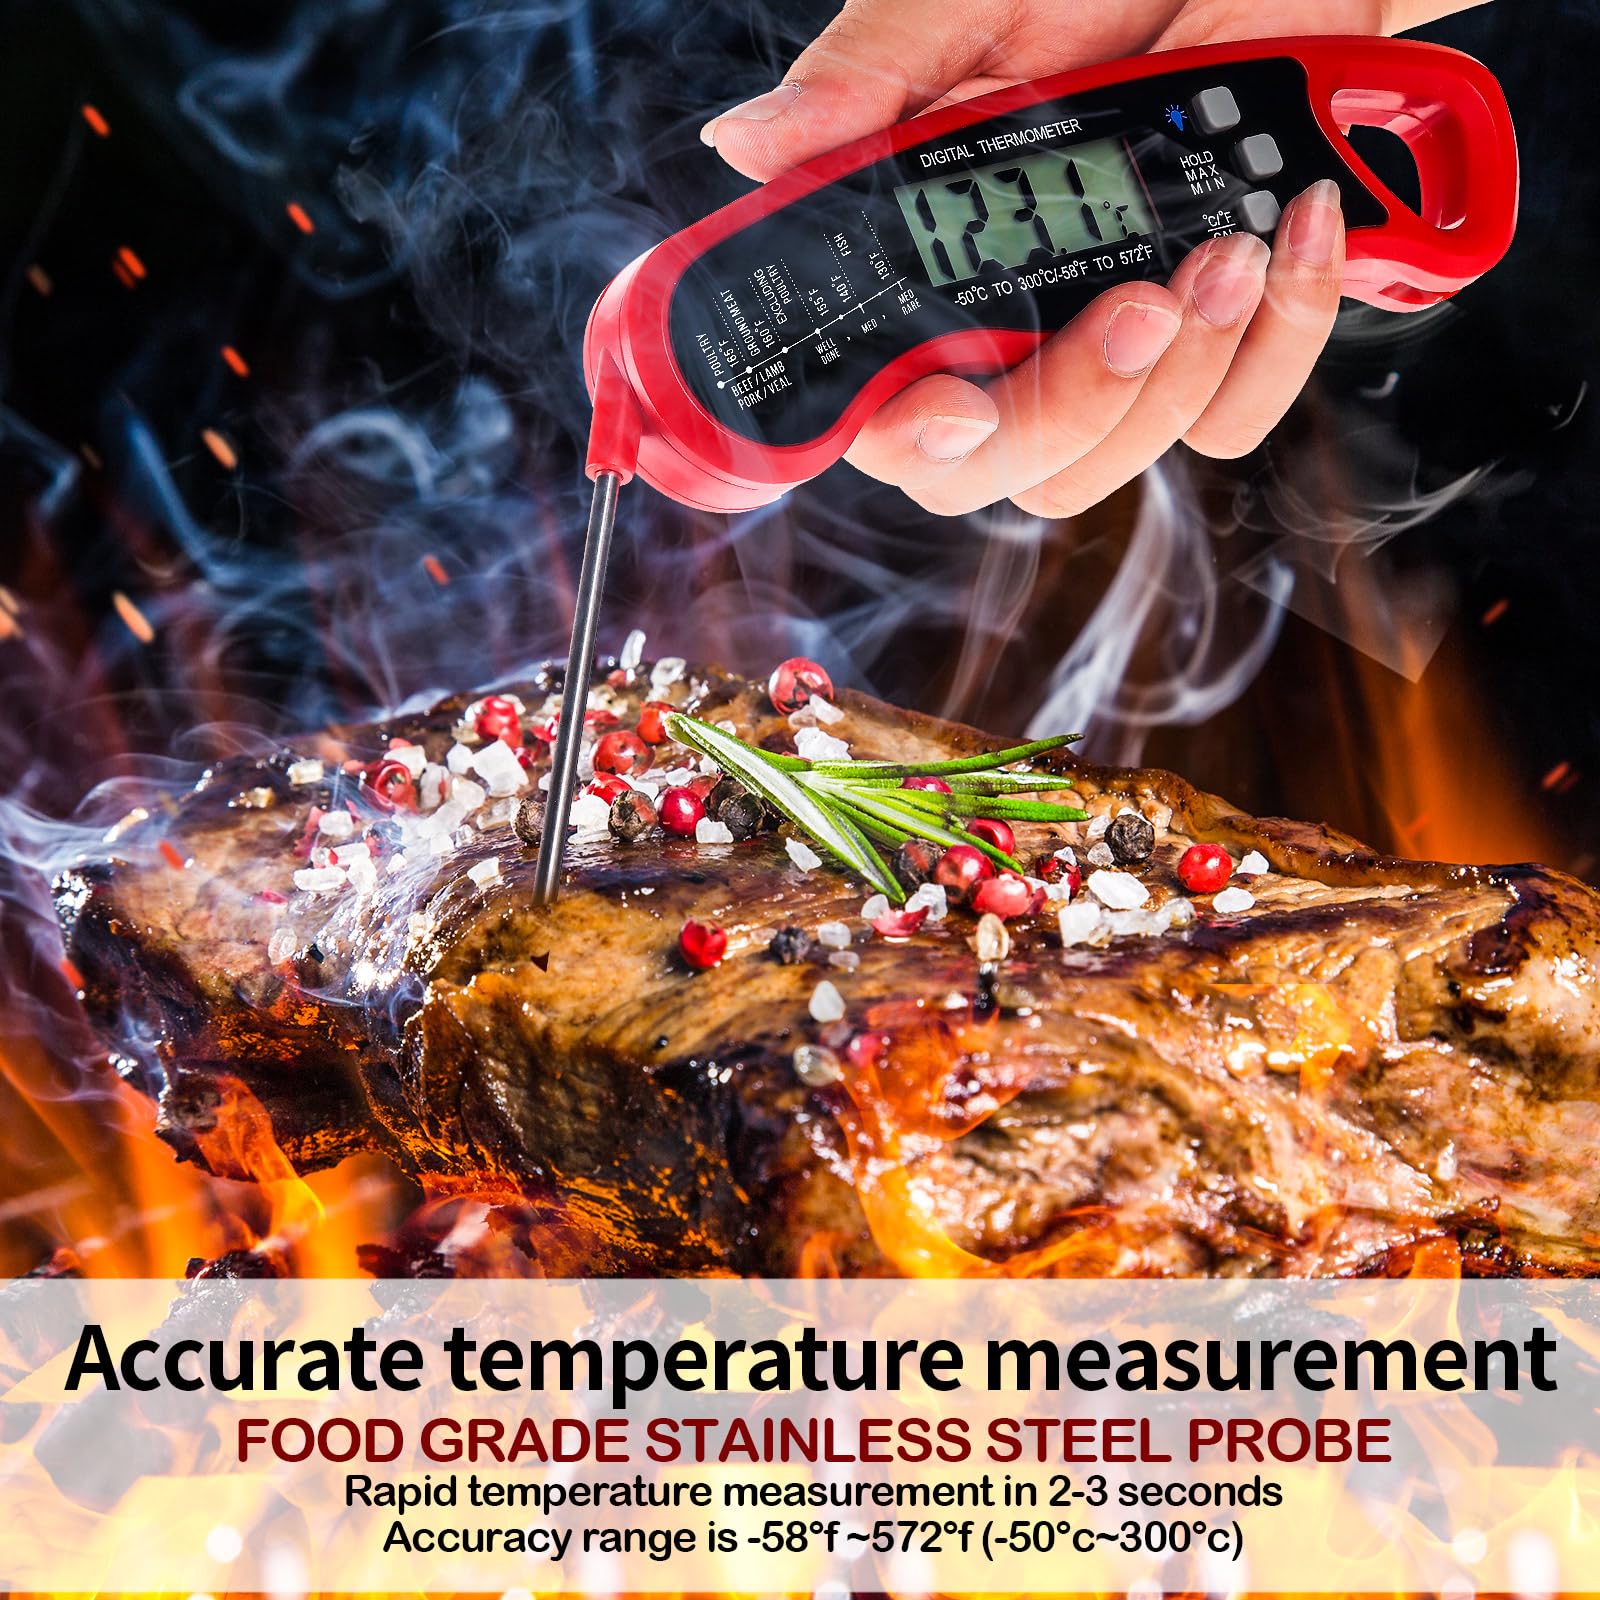 Xuhal 3 Pcs Instant Read Meat Thermometer Waterproof Precise Digital Food Thermometer Red Oven Grilling Cooking Thermometer with Folding Probe Backlight and Calibration for Kitchen Outdoor BBQ Candy